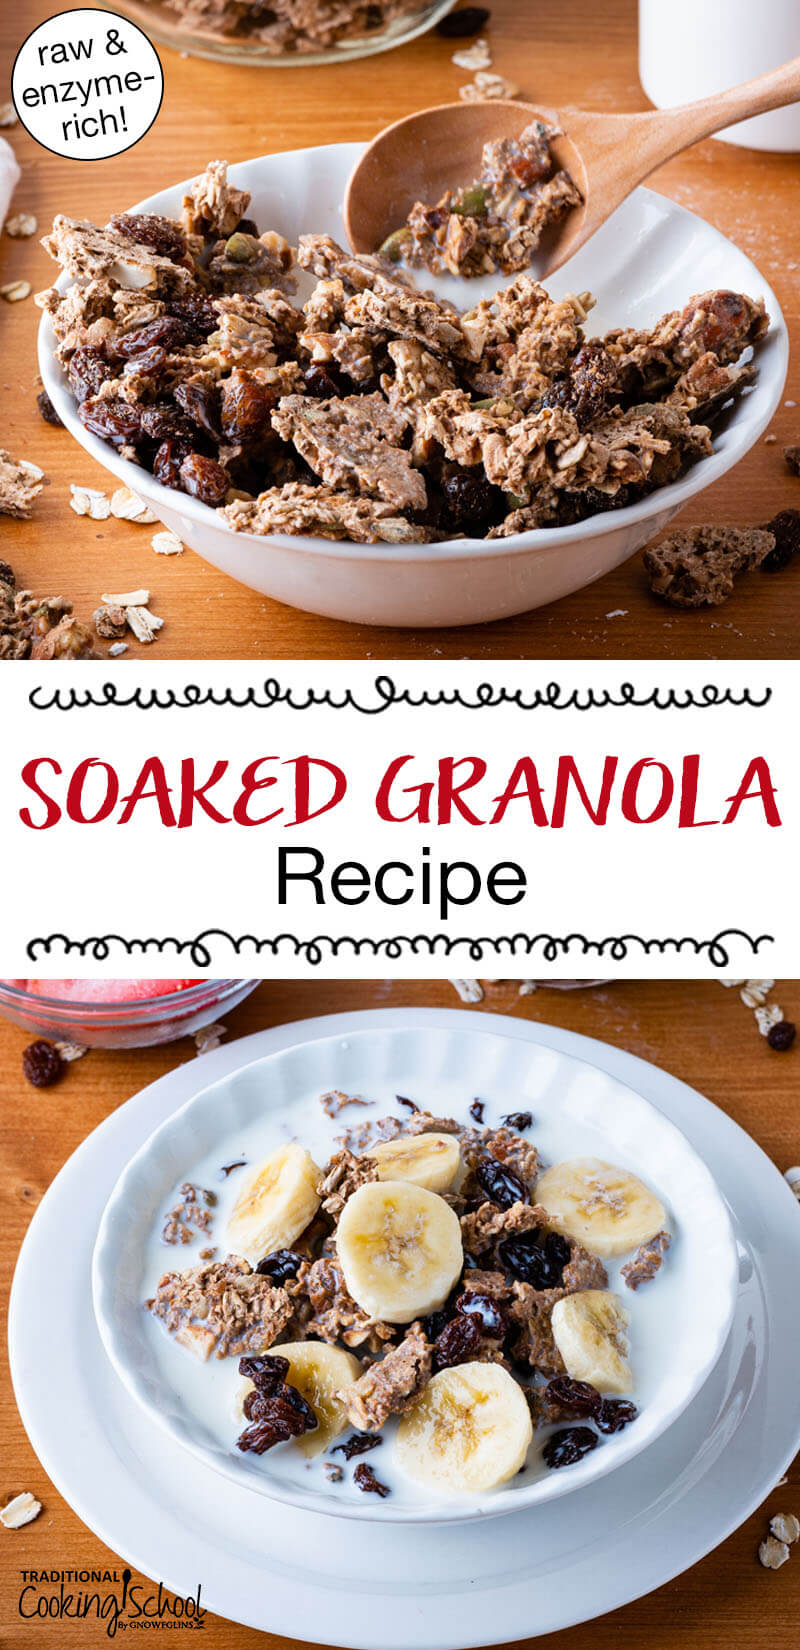 Photo collage of homemade granola, enjoyed plain or topped with banana slices and milk. Text overlay says: "Soaked Granola Recipe (raw & enzyme-rich!!)"